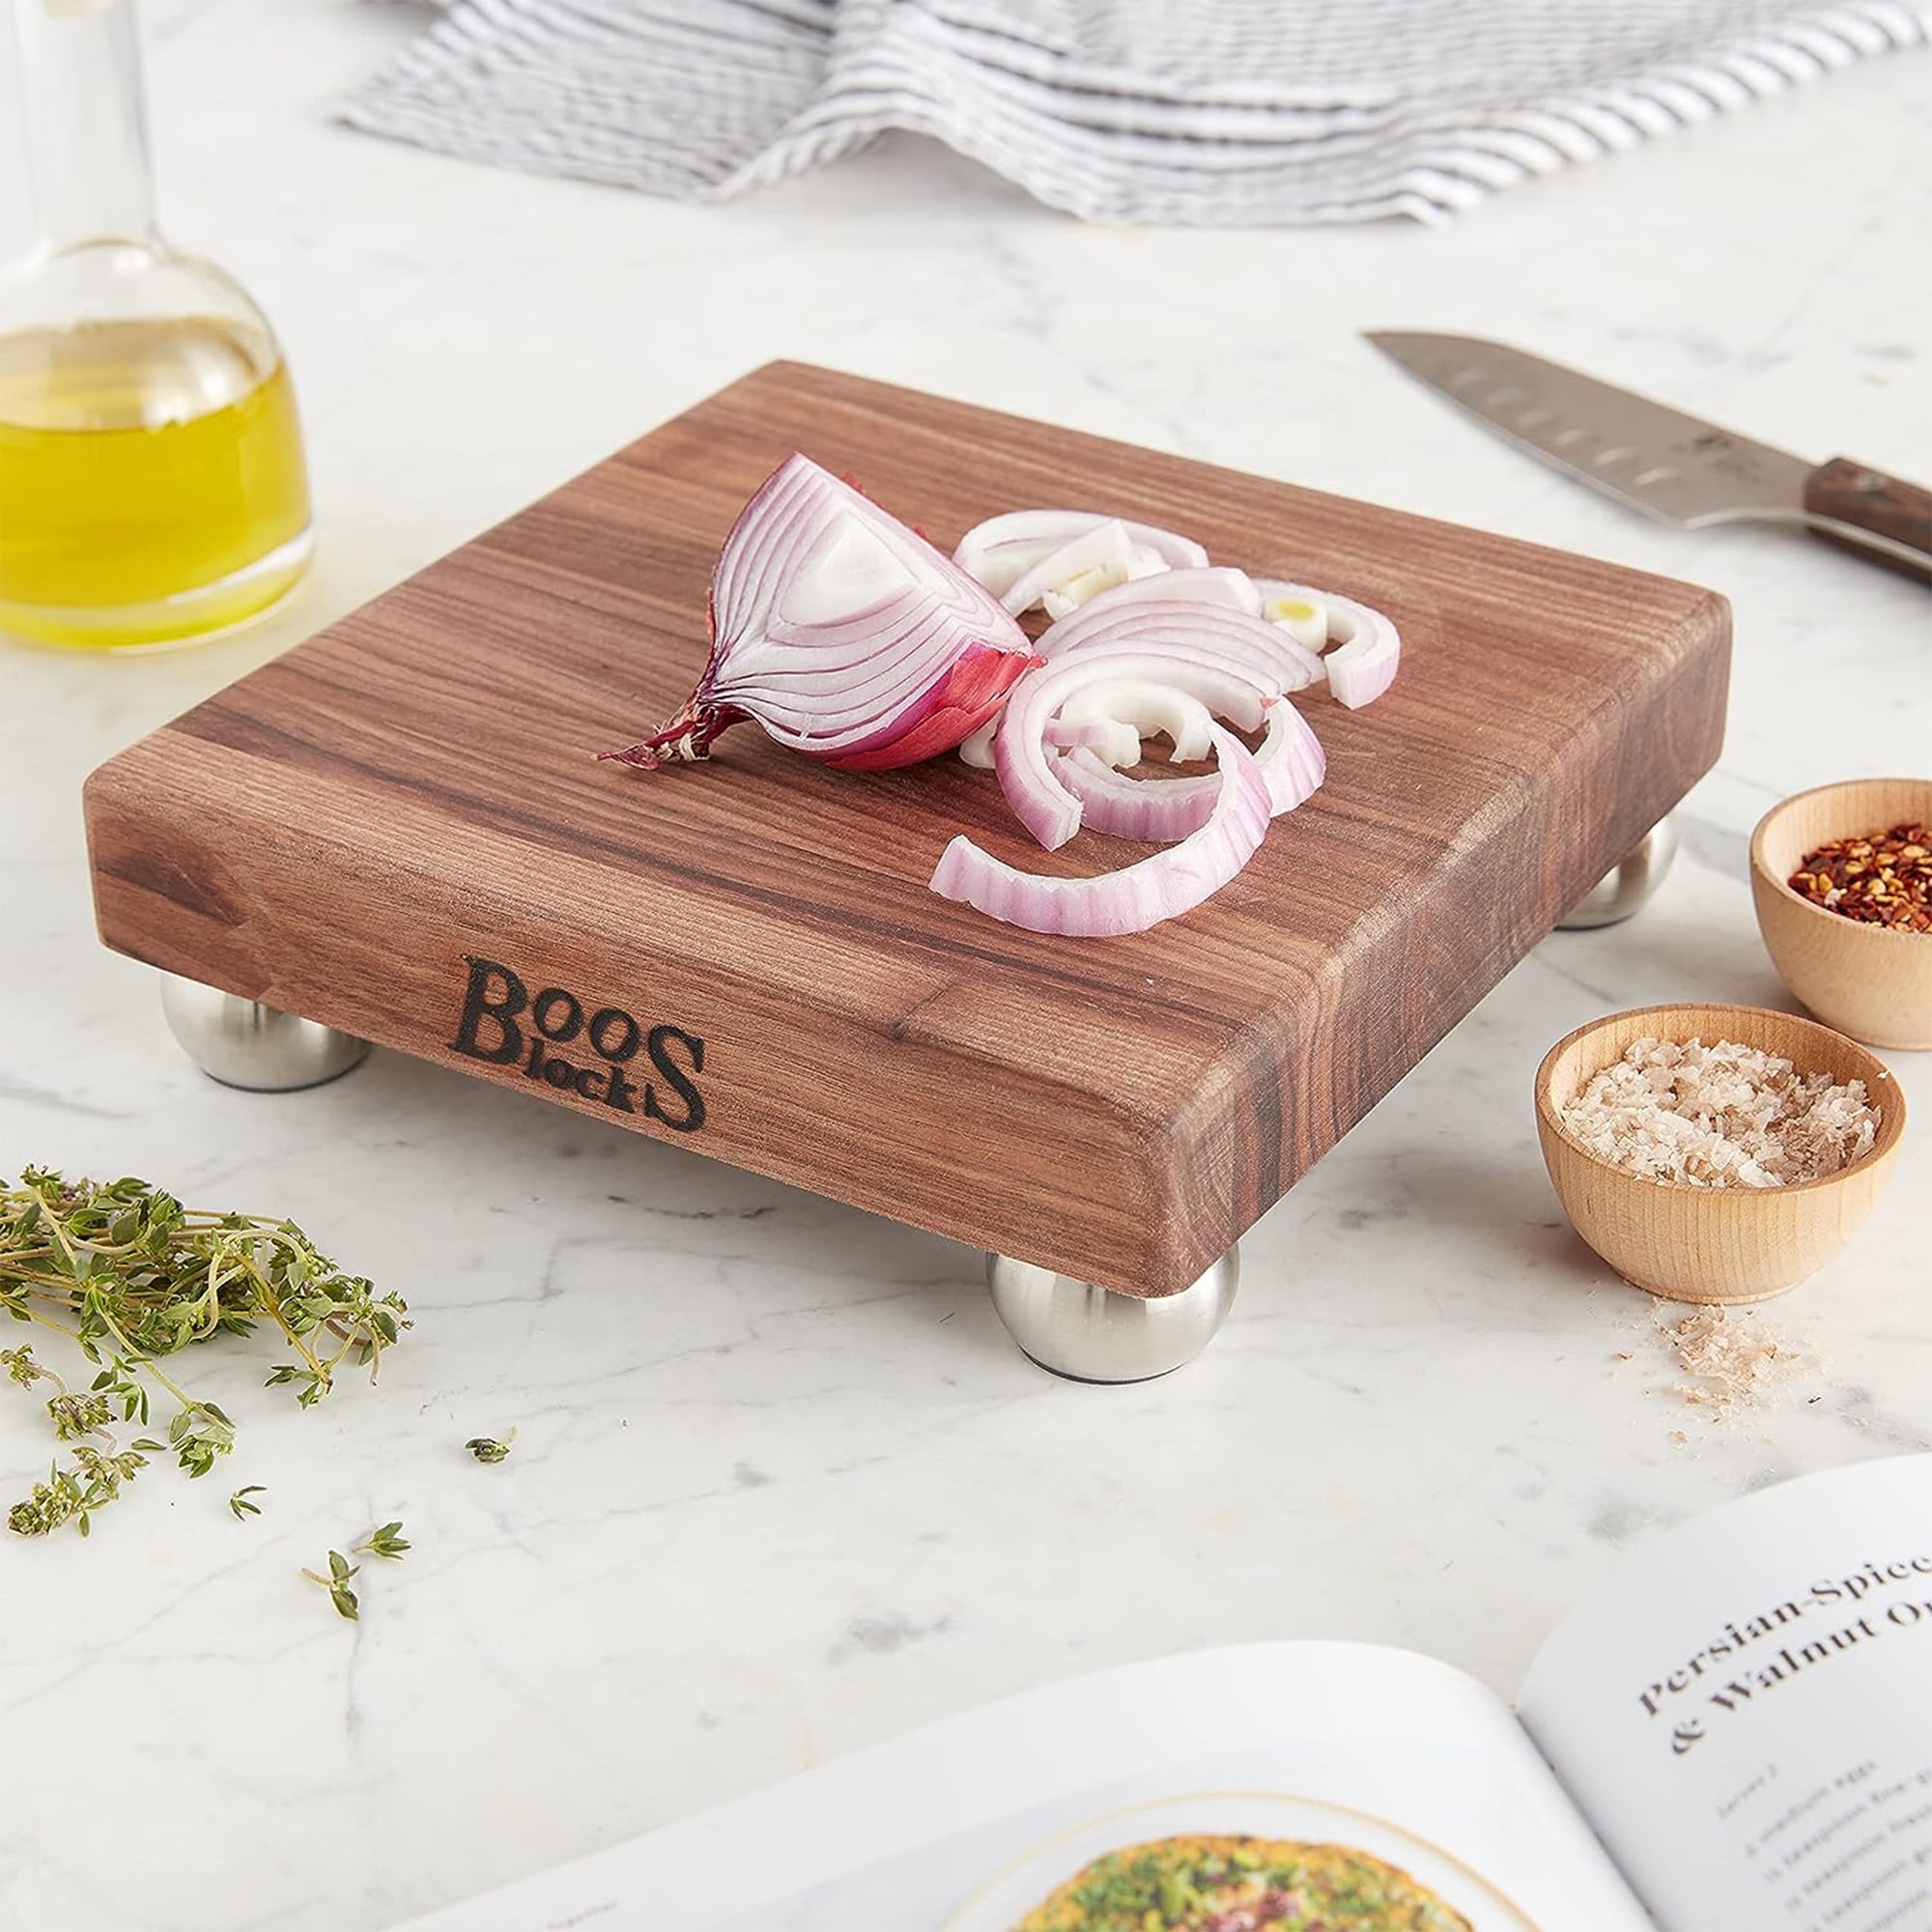 John Boos Small Maple Wood Cutting Board For Kitchen, 9 Inches X 9 Inches,  1.5 Inches Thick Edge Grain Square Boos Chopping Block With Wooden Bun Feet  : Target